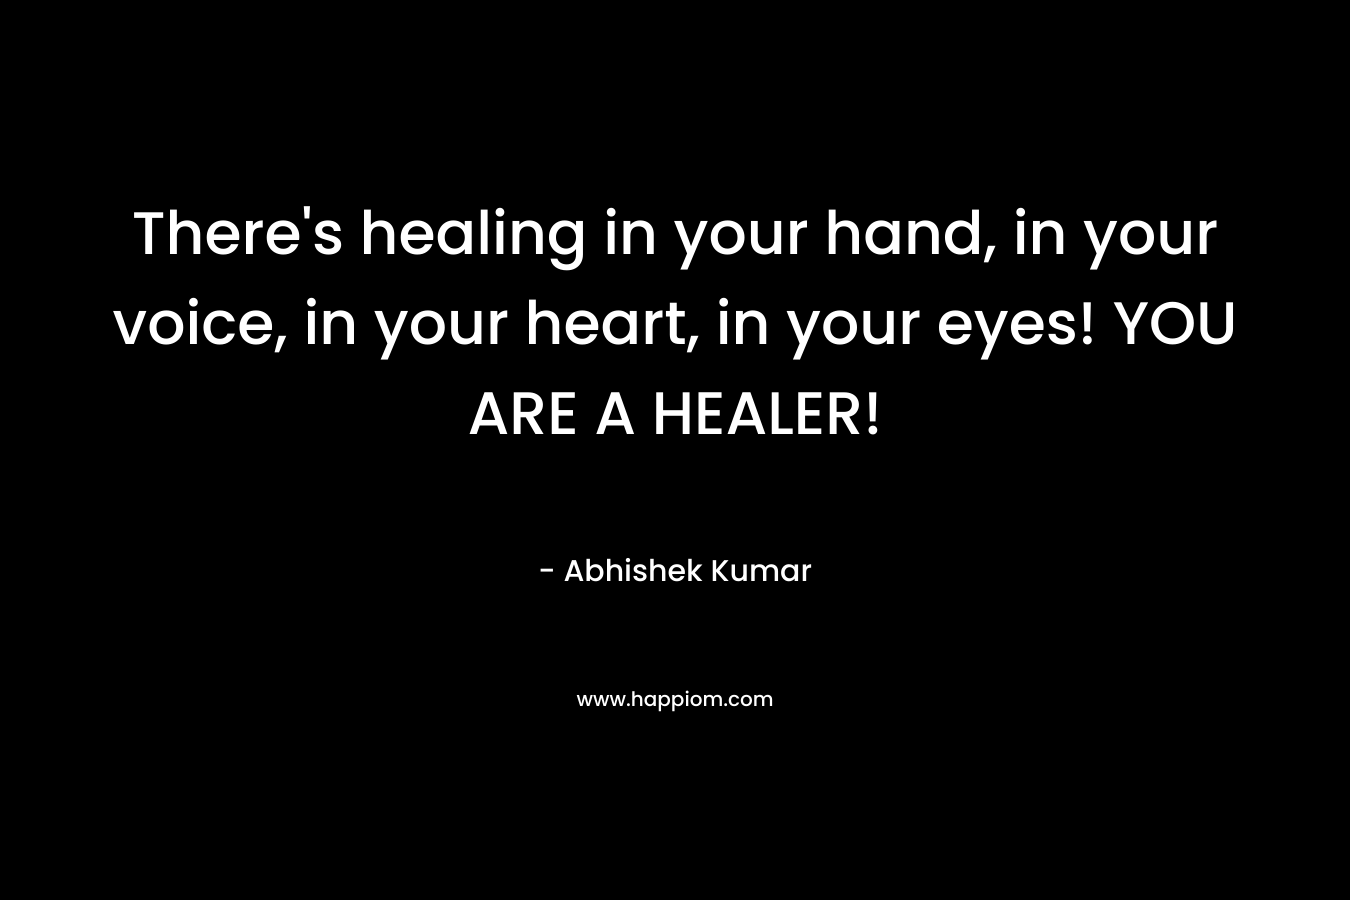 There’s healing in your hand, in your voice, in your heart, in your eyes! YOU ARE A HEALER! – Abhishek Kumar